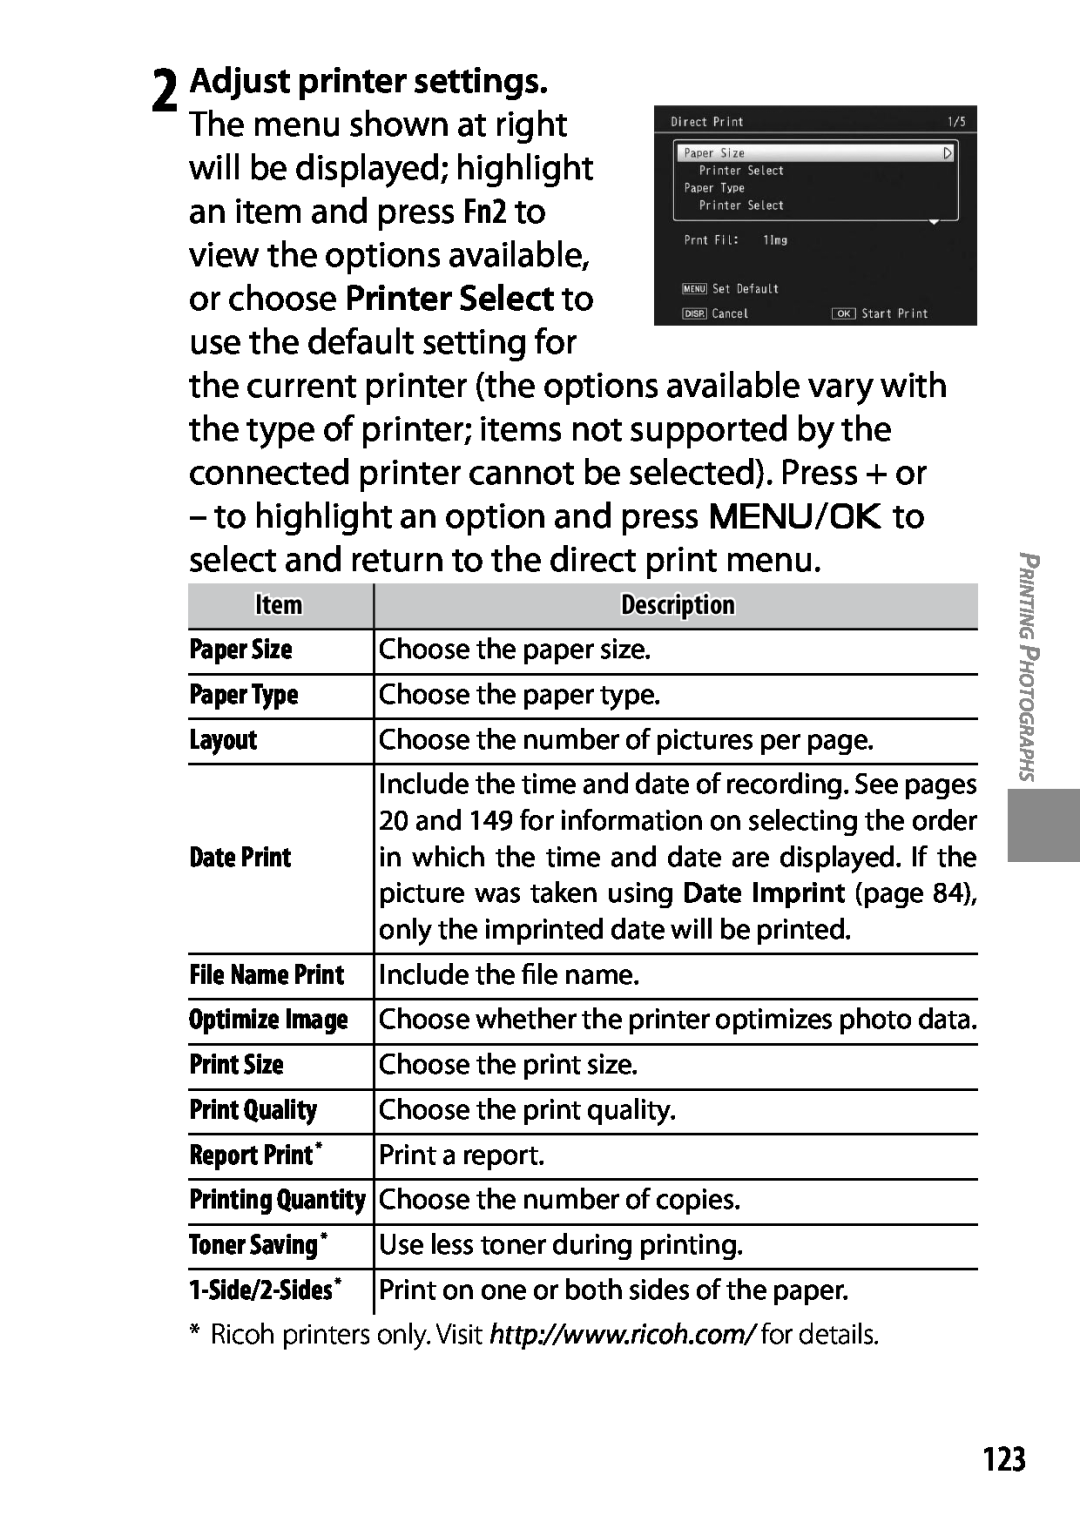 Ricoh GXR, 170543, 170553 manual to highlight an option and press C/Dto, select and return to the direct print menu 